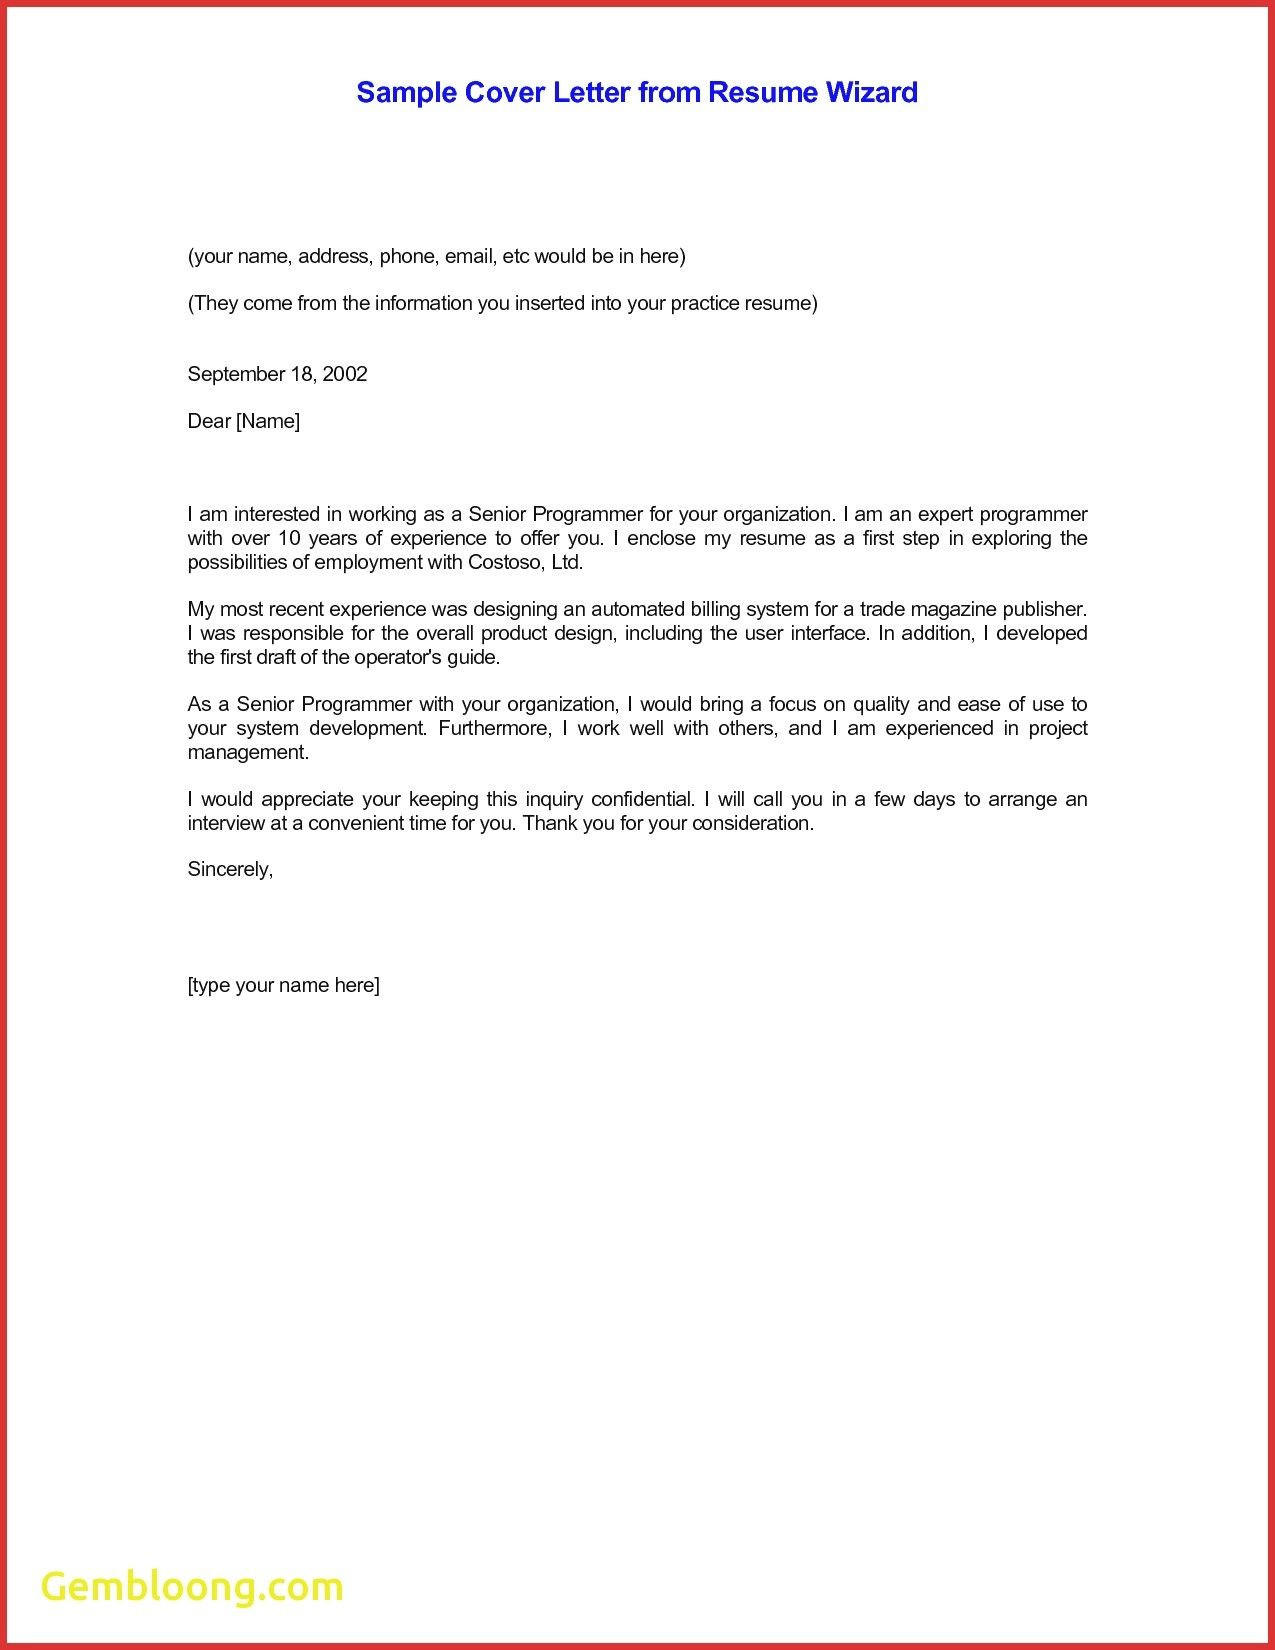 Sample Email when attaching Cover Letter and Resume Email Cv Cover Letter Template – Resume format Cover Letter for …